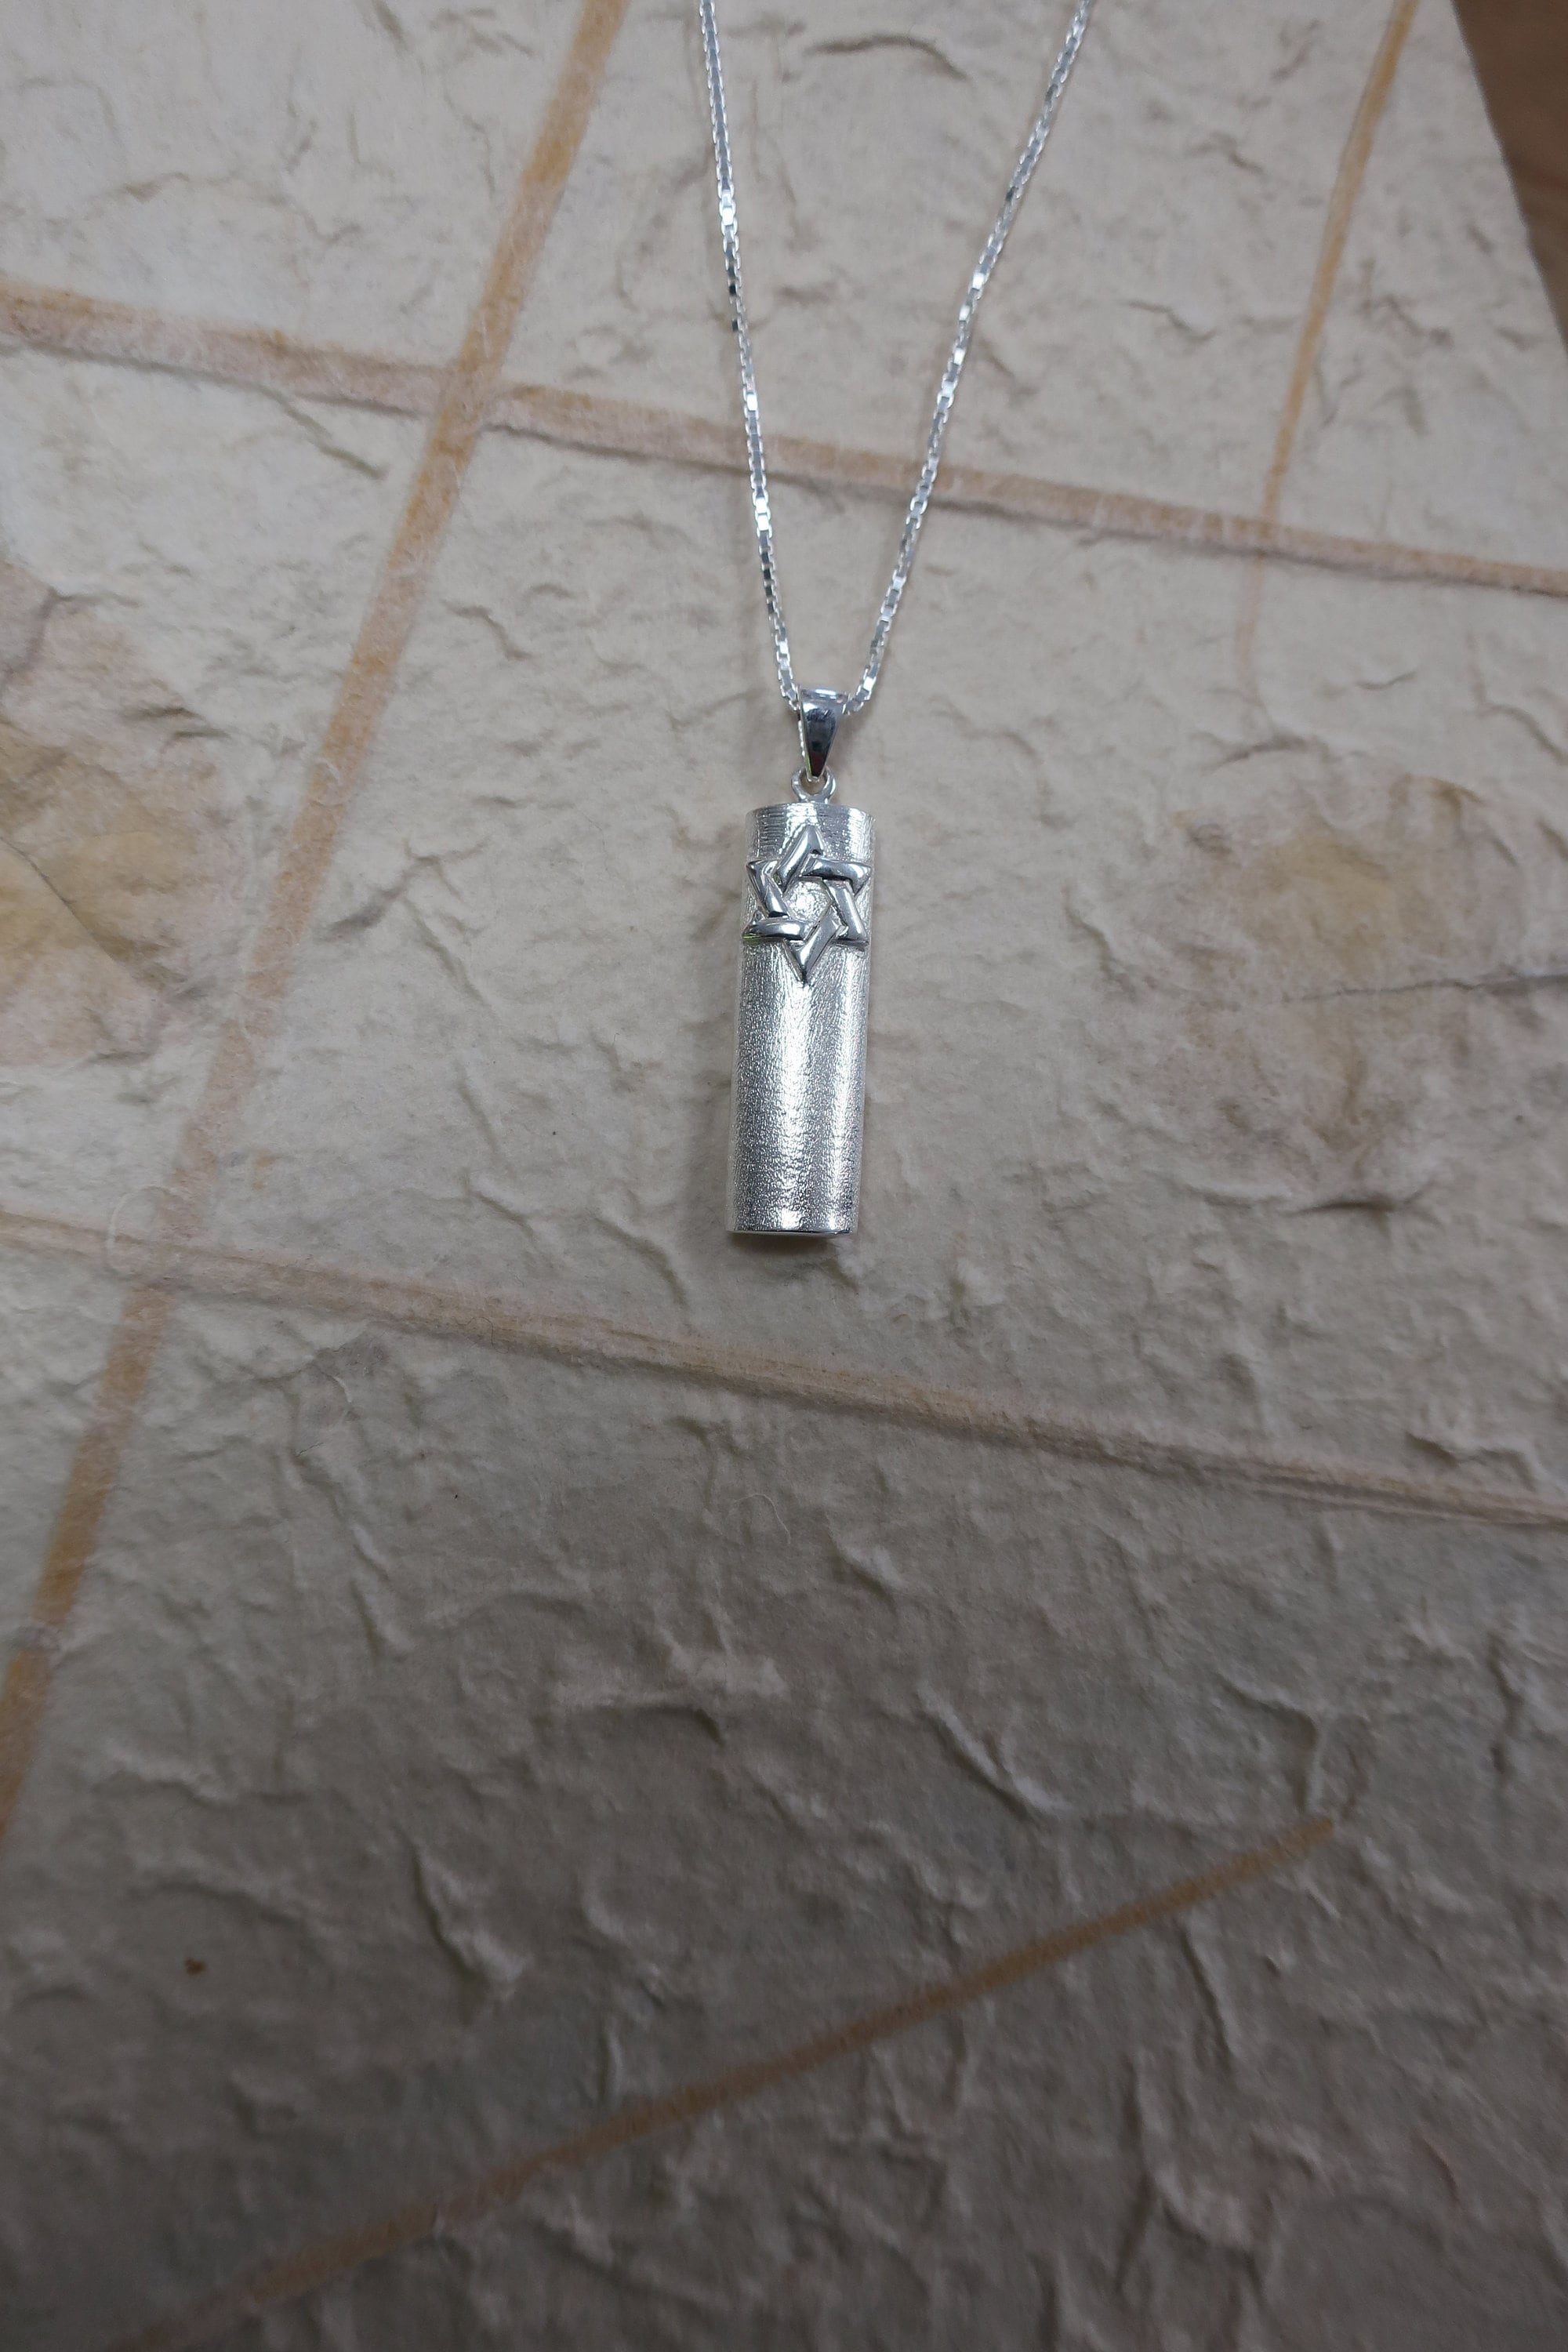 Brushed Sterling Silver Mezuzah Pendant With a Magen David Jewish